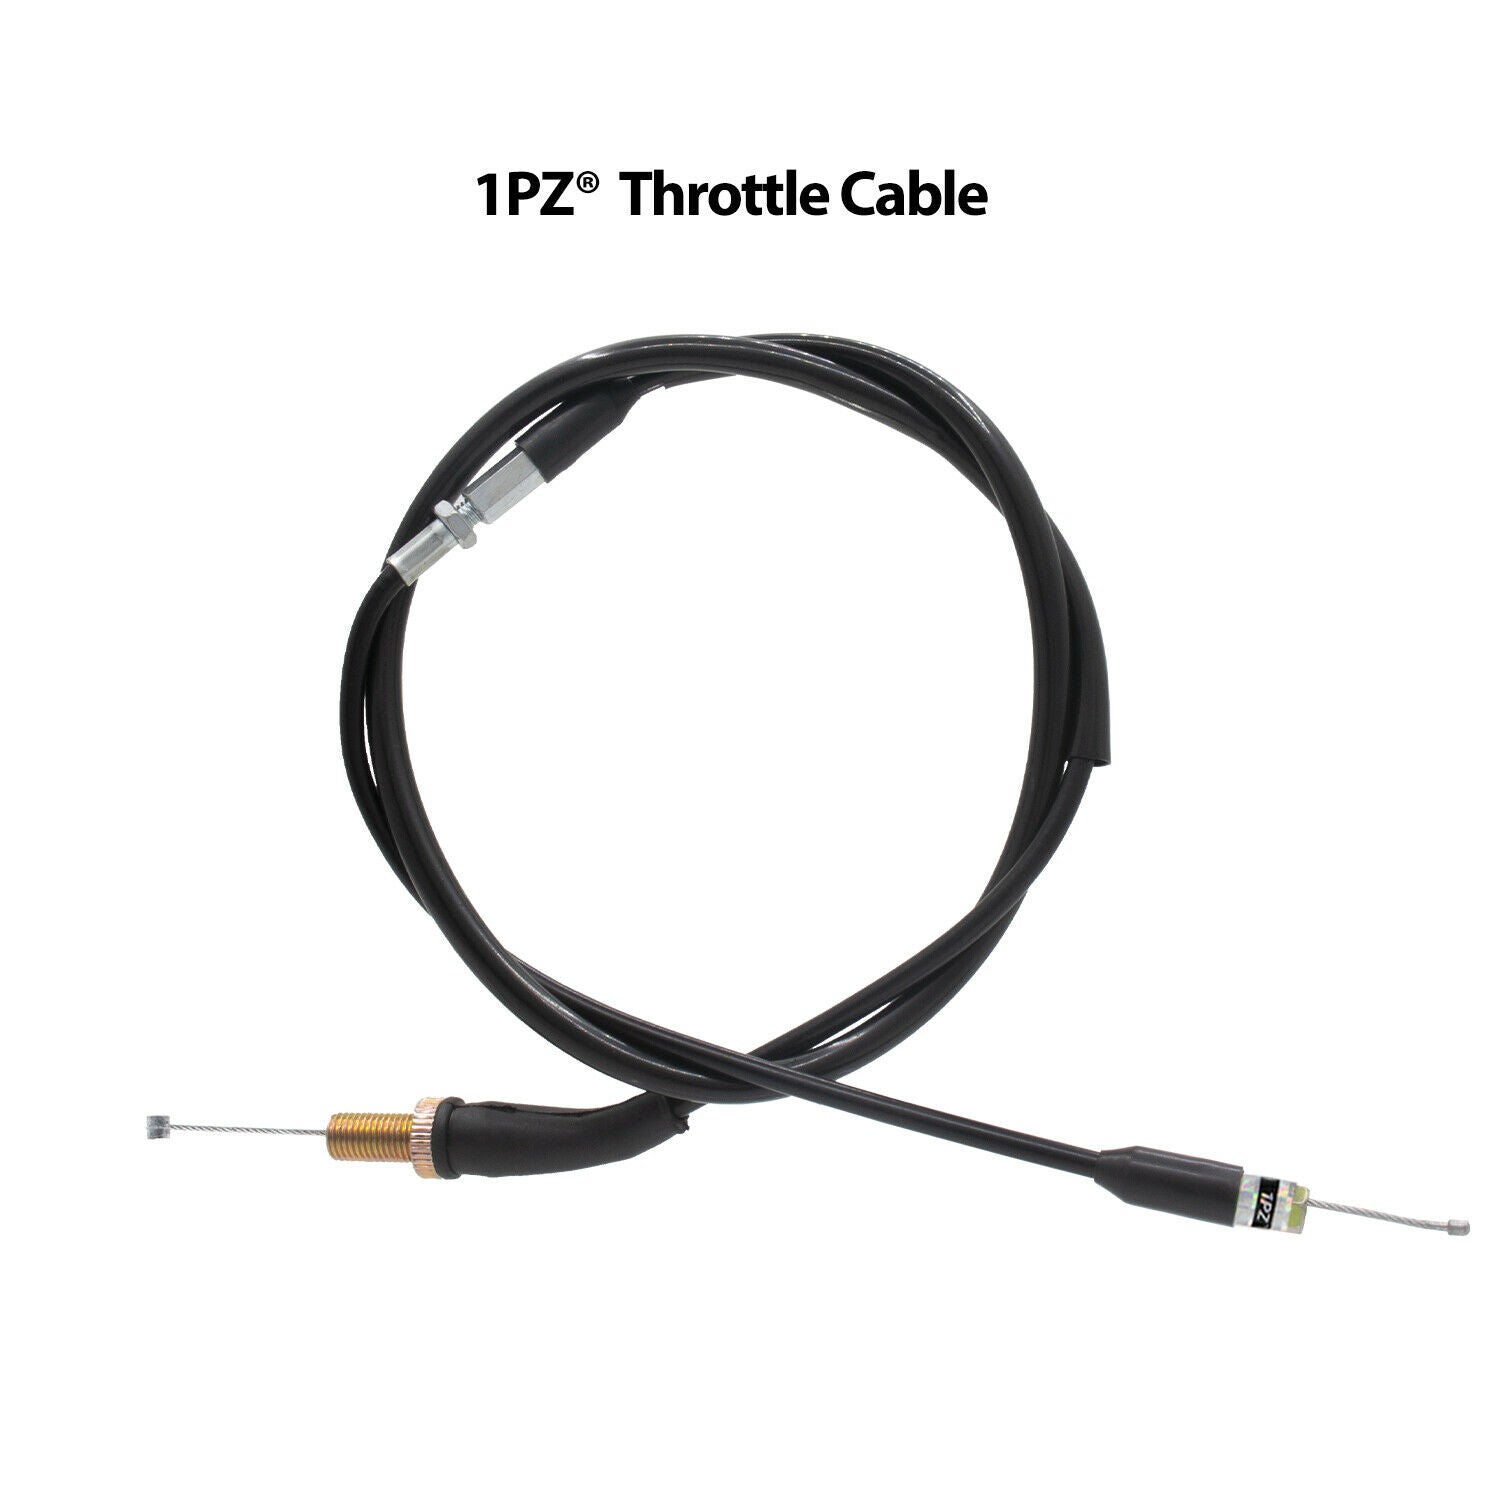 1PZ Throttle Cable Replacement for Yamaha YFM350 350 Warrior 2001-2004